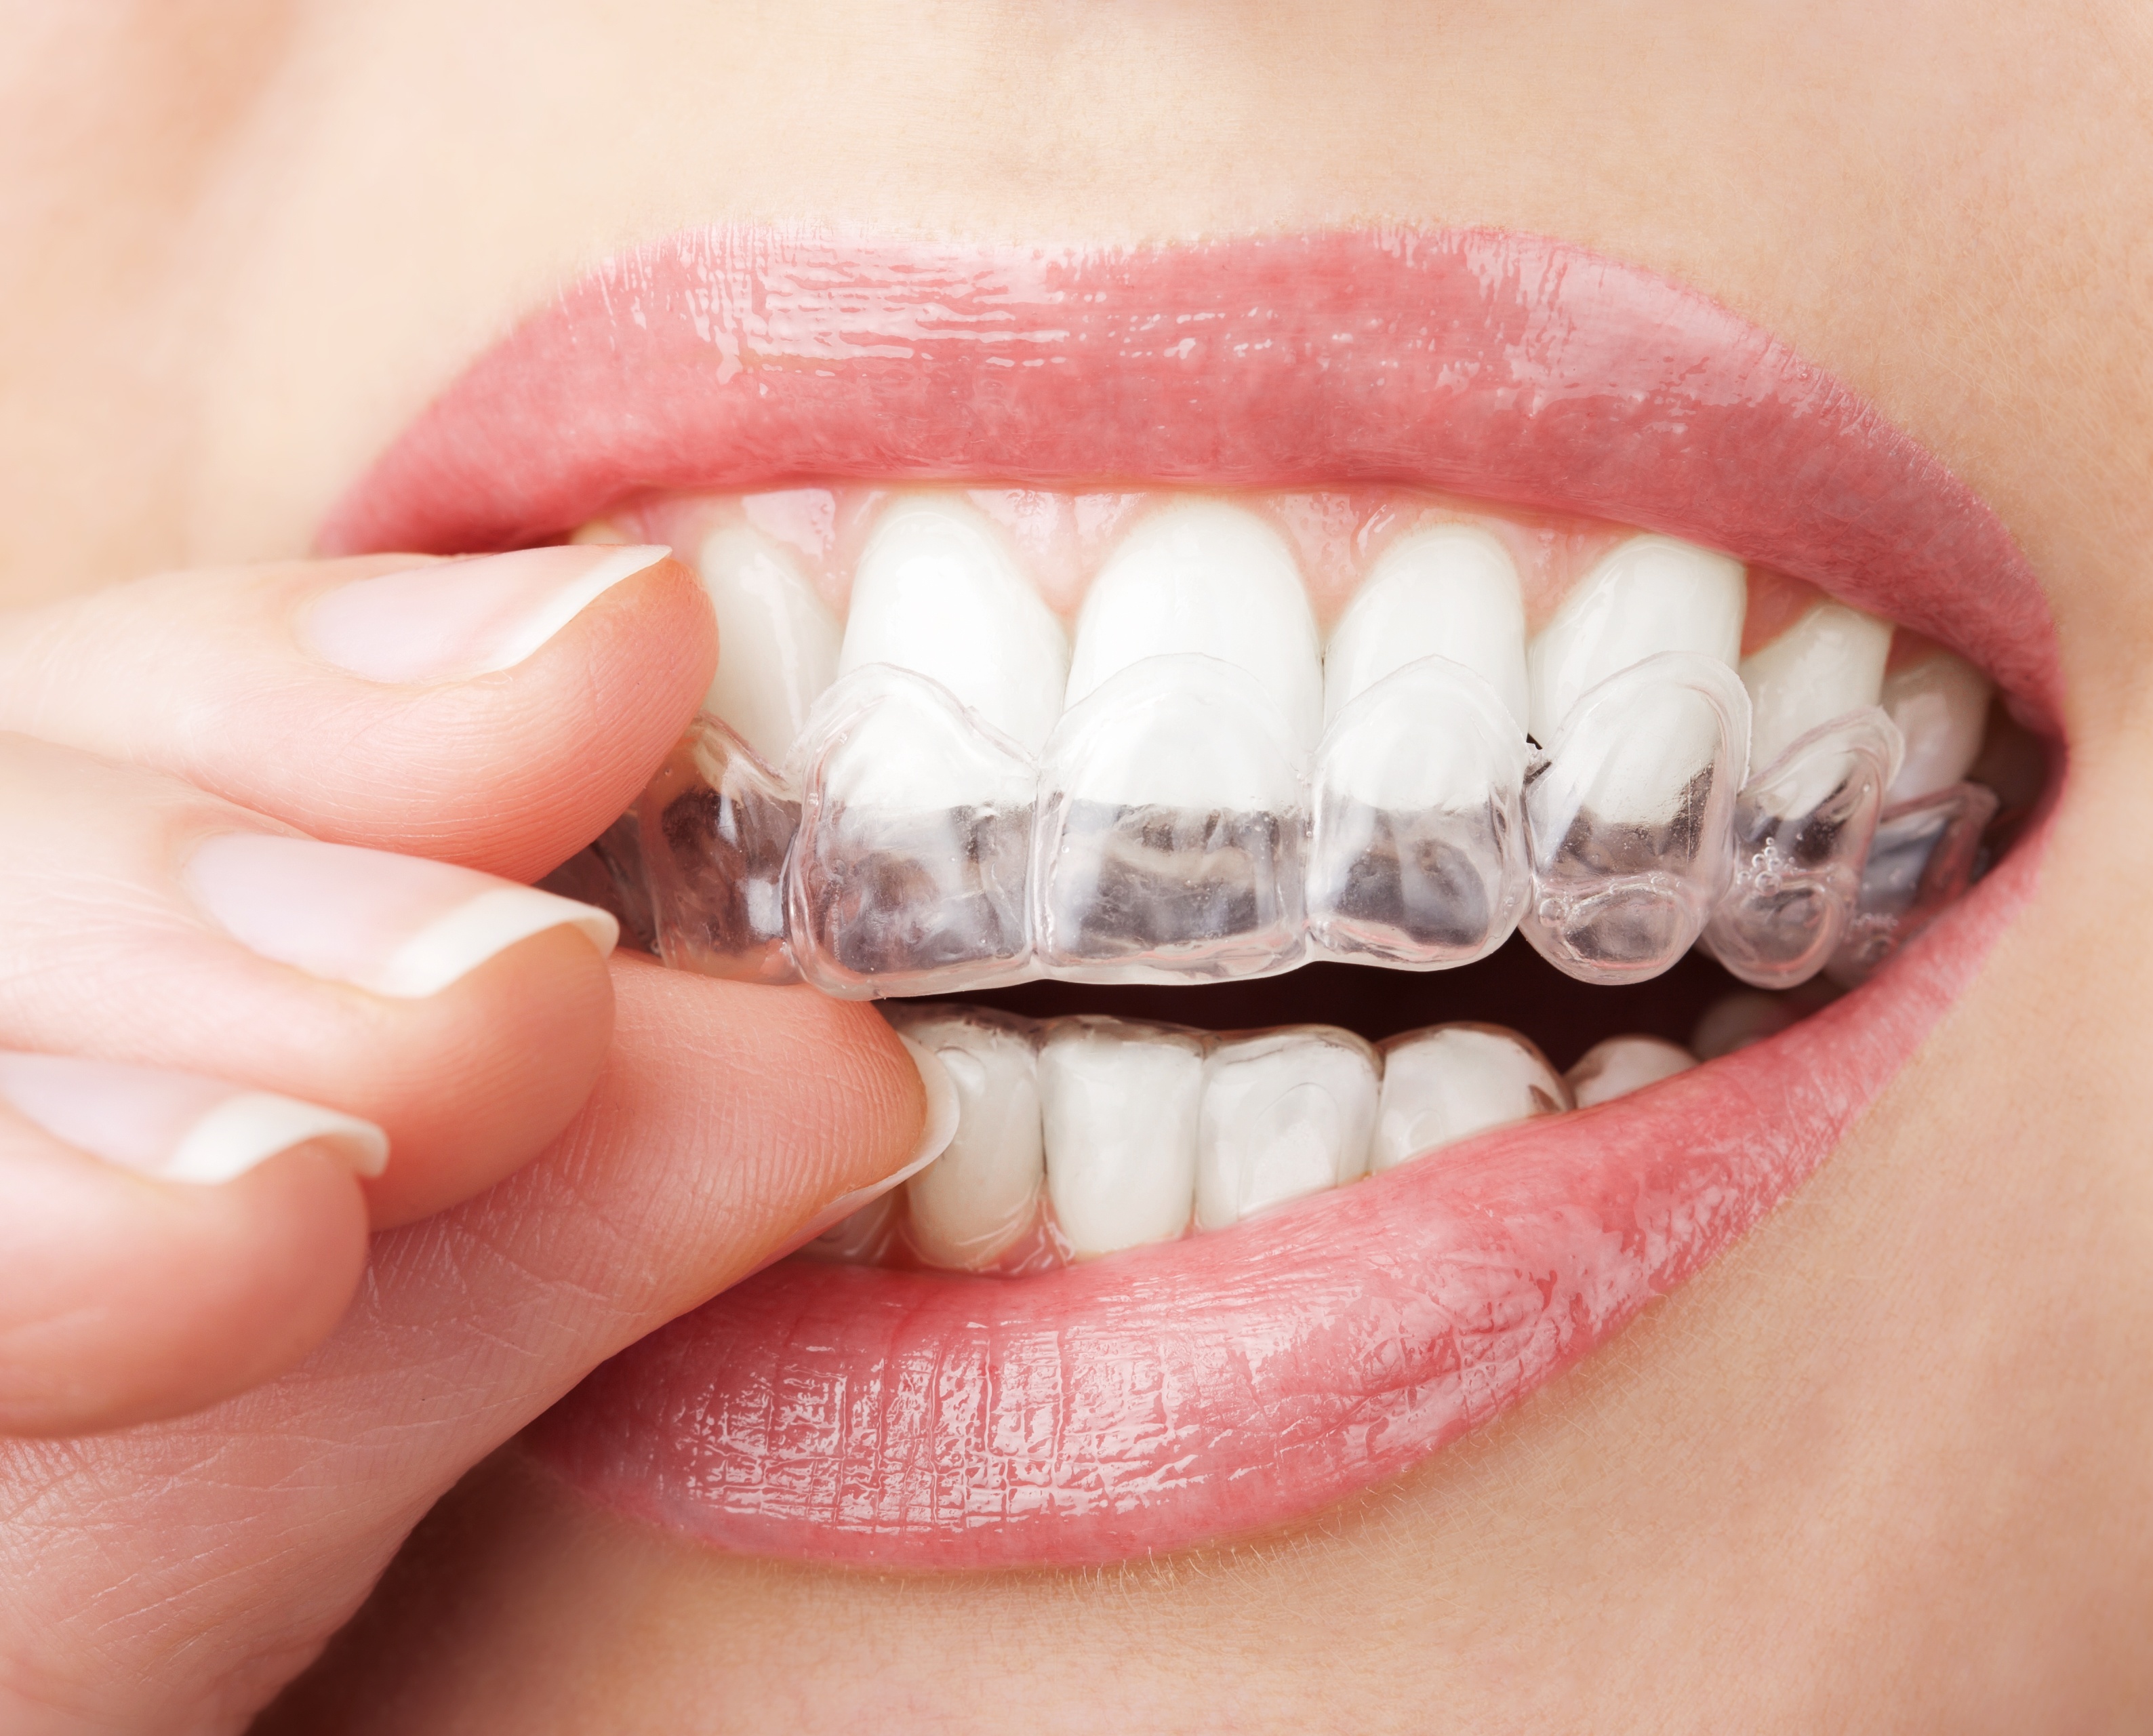 Where can I get Louisville Invisalign?